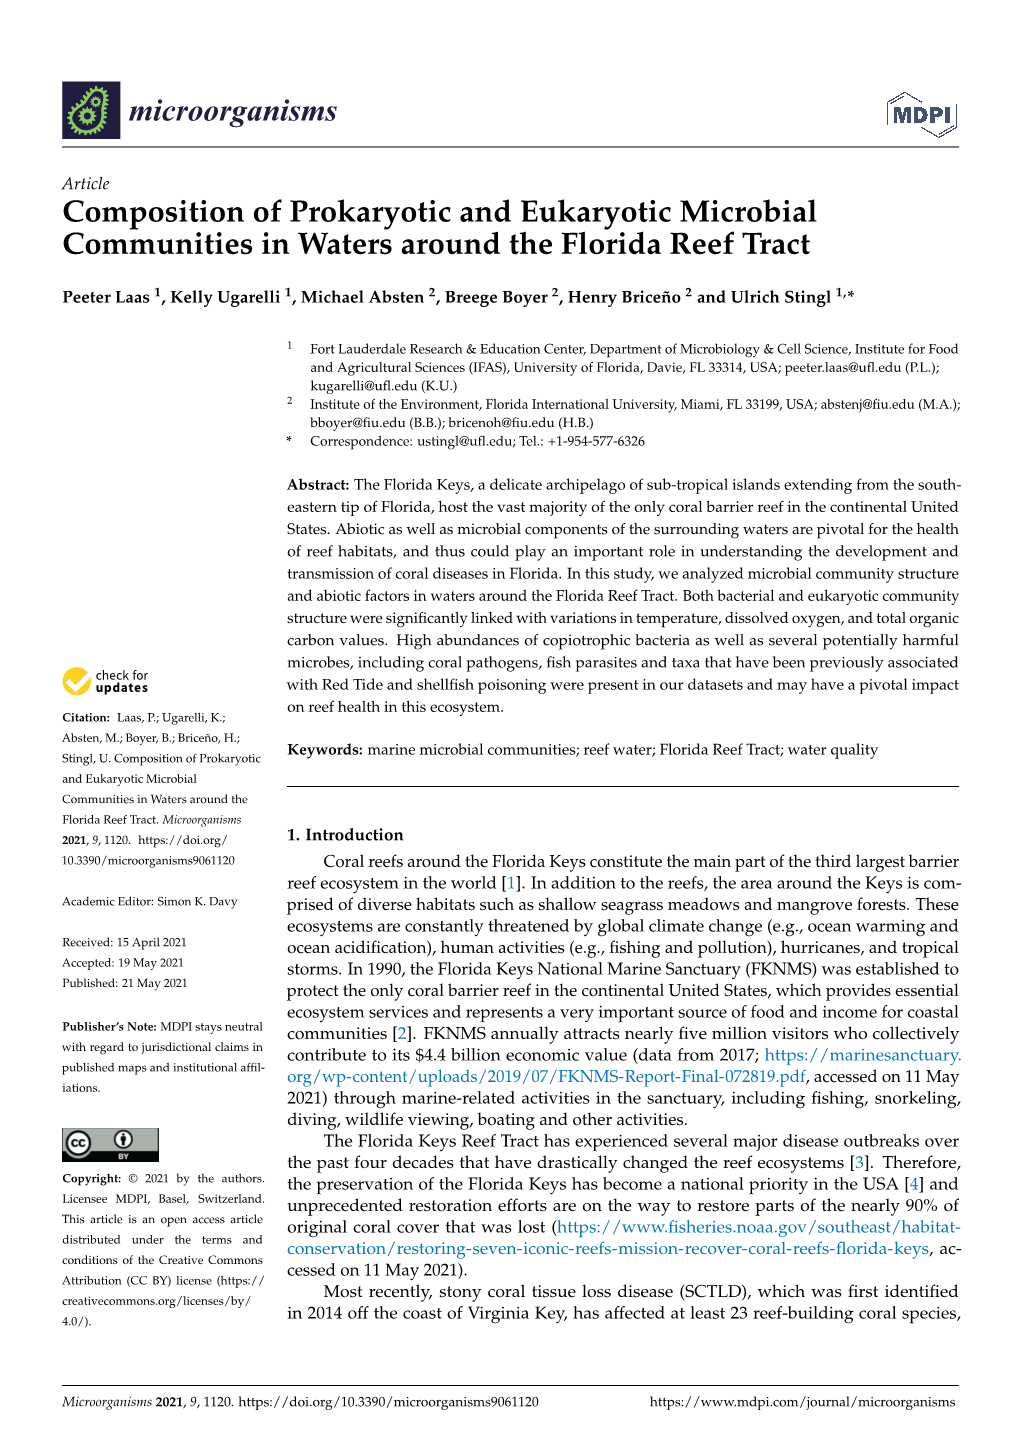 Composition of Prokaryotic and Eukaryotic Microbial Communities in Waters Around the Florida Reef Tract